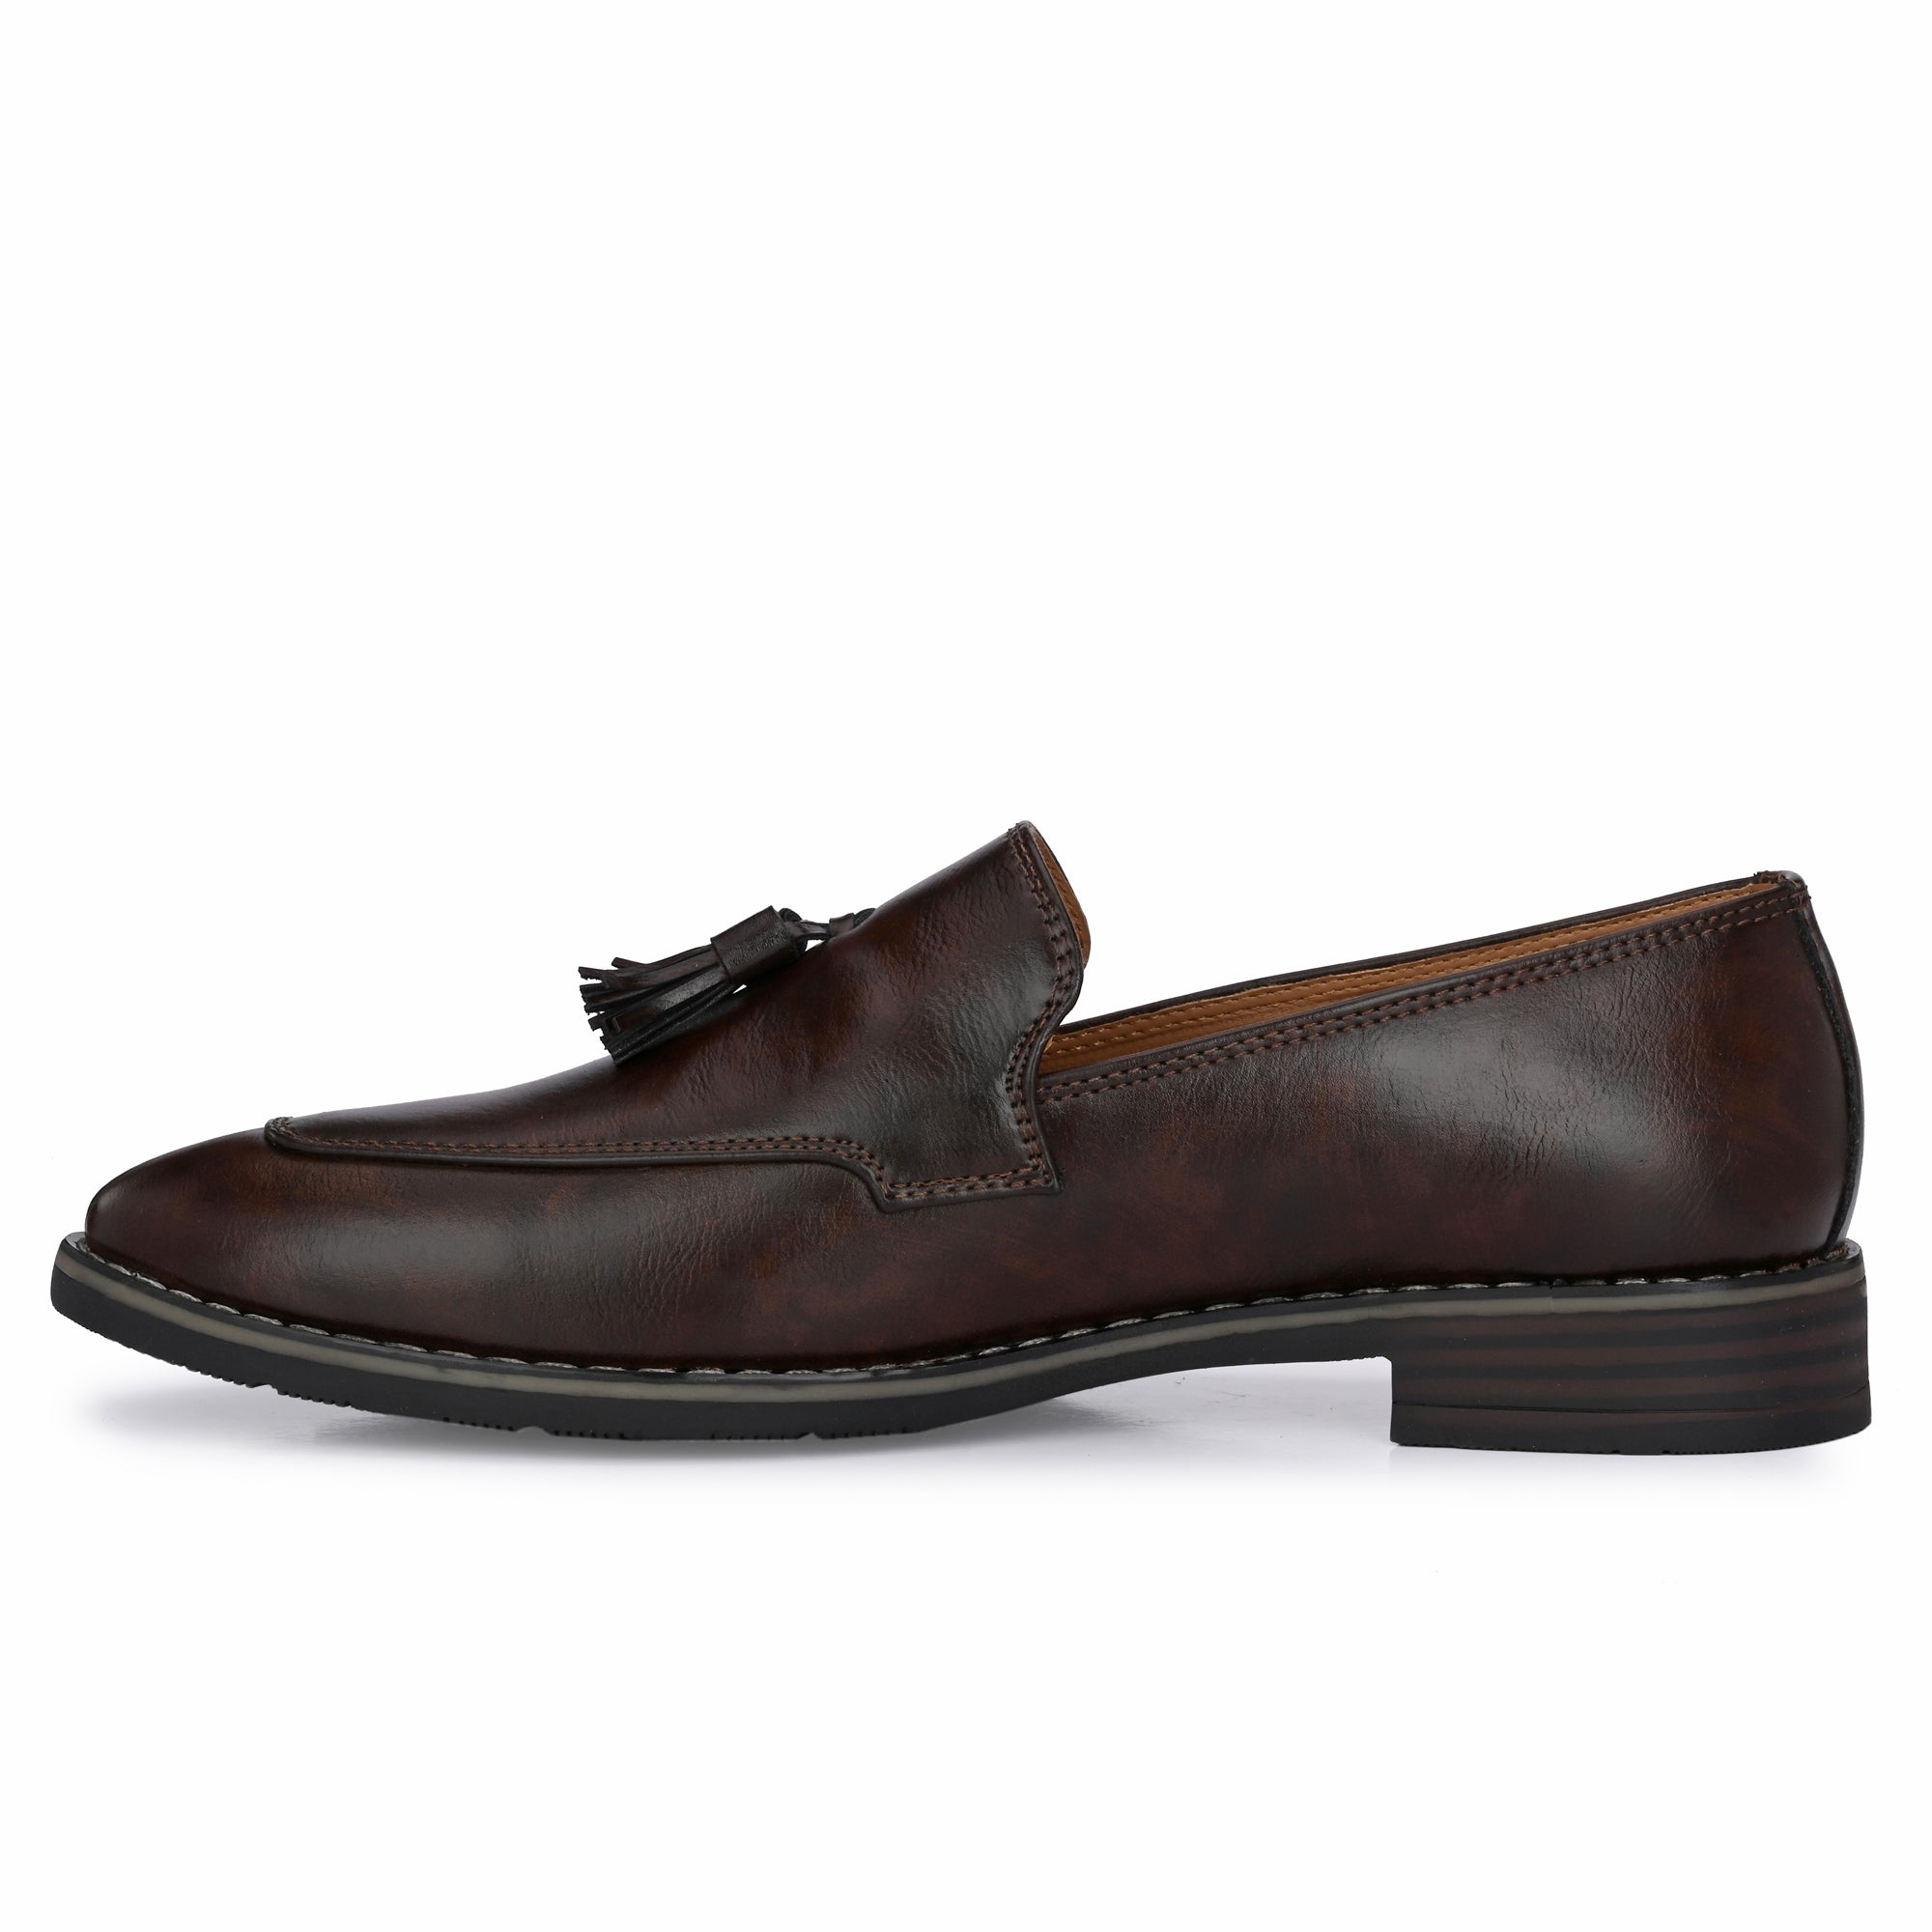 brown-loafers-attitudist-shoes-for-men-with-tassel-sp13b